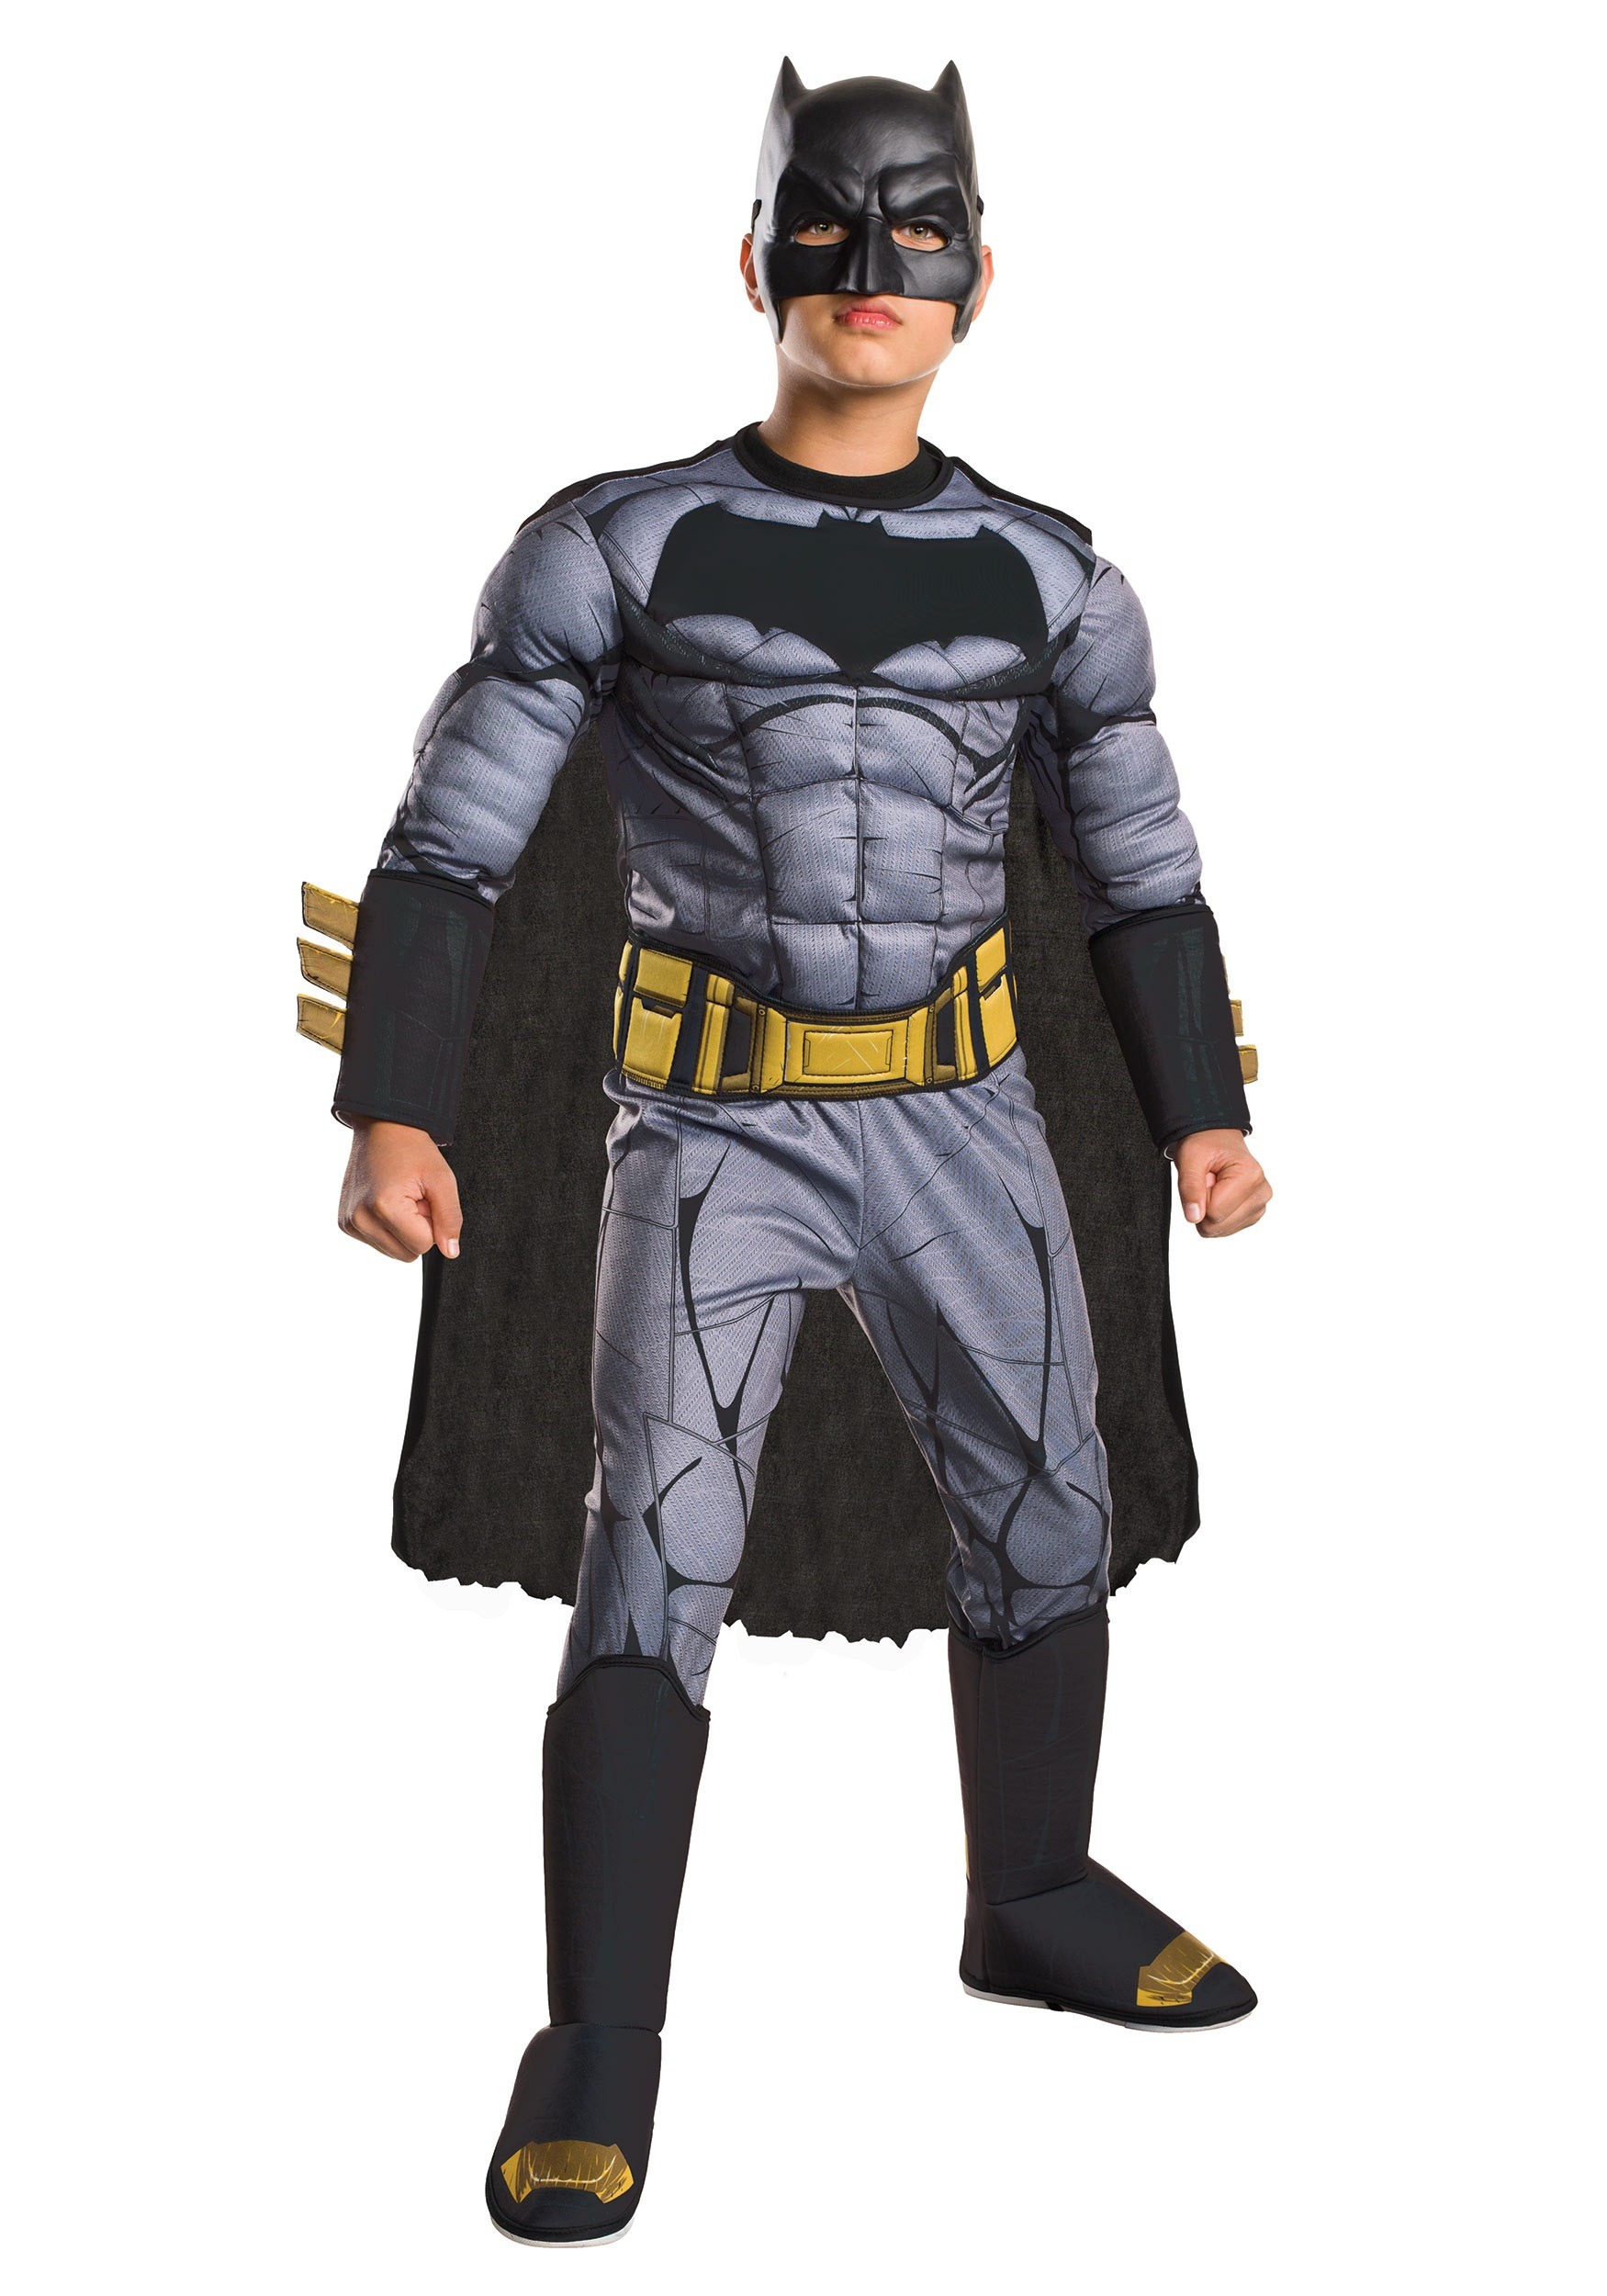 Deluxe Dawn of Justice Batman Costume for Boys